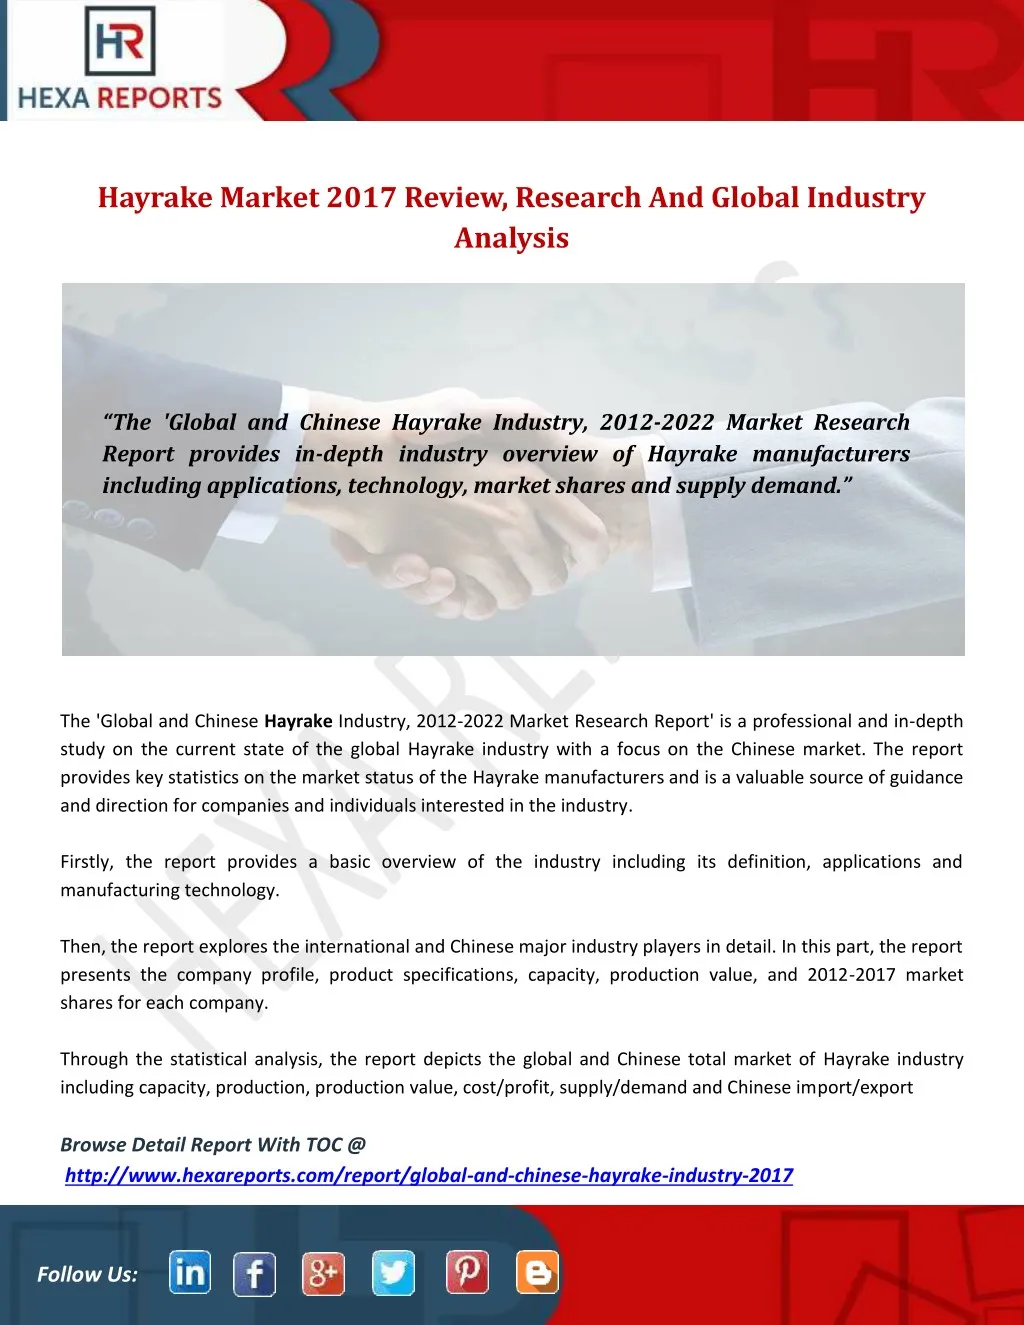 hayrake market 2017 review research and global